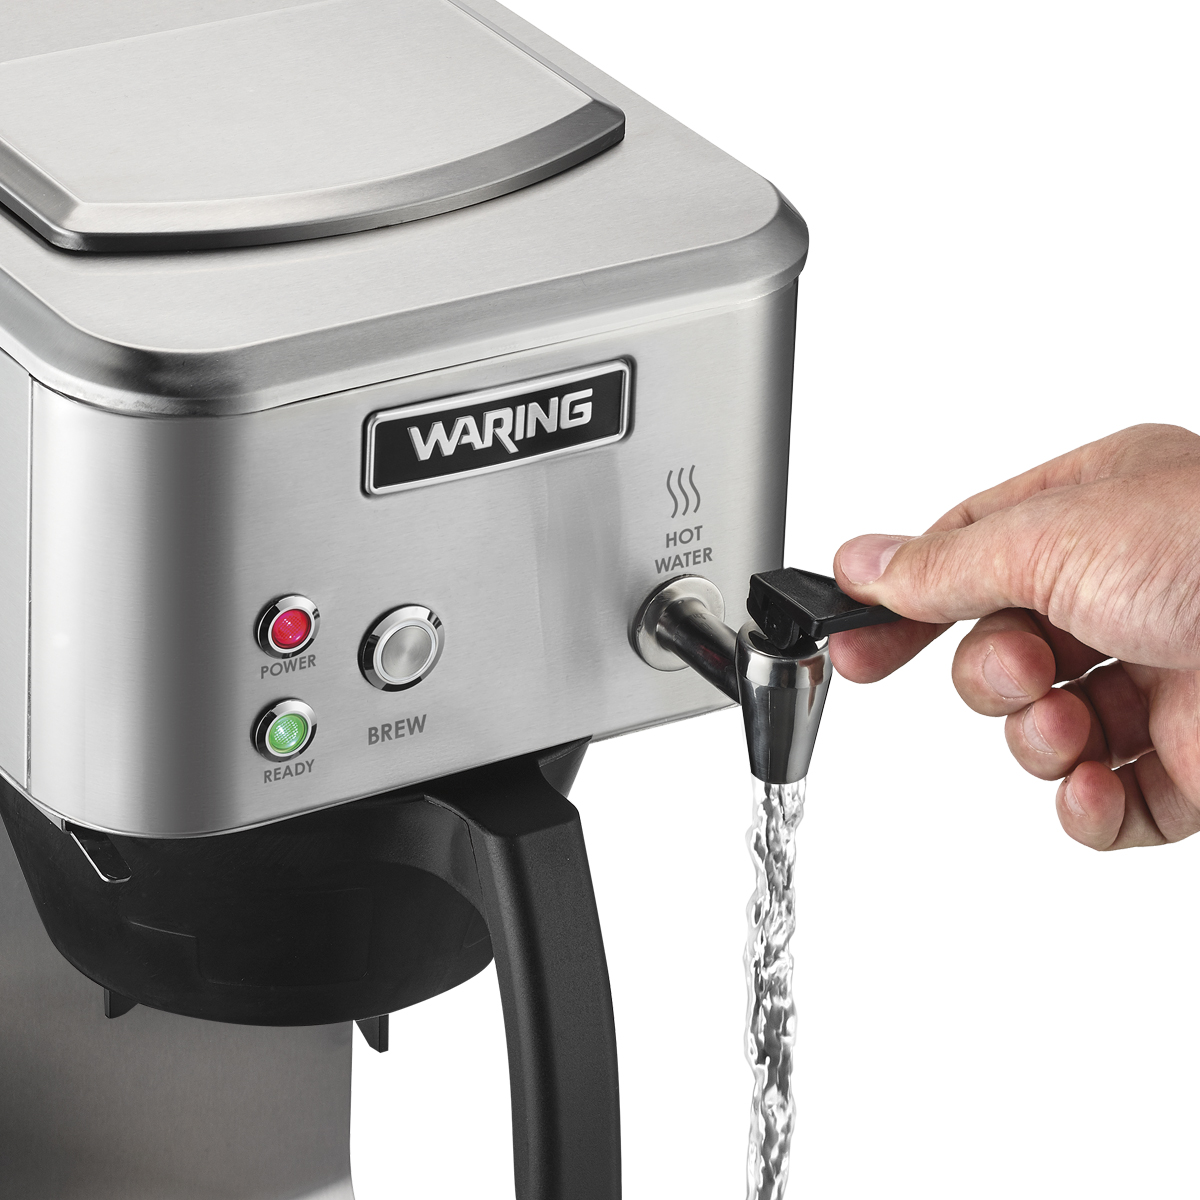 https://www.waringcommercialproducts.com/files/products/wcm60pt-waring-cafe-deco-thermal-coffee-brewer-inset-3-1200x1200.jpg